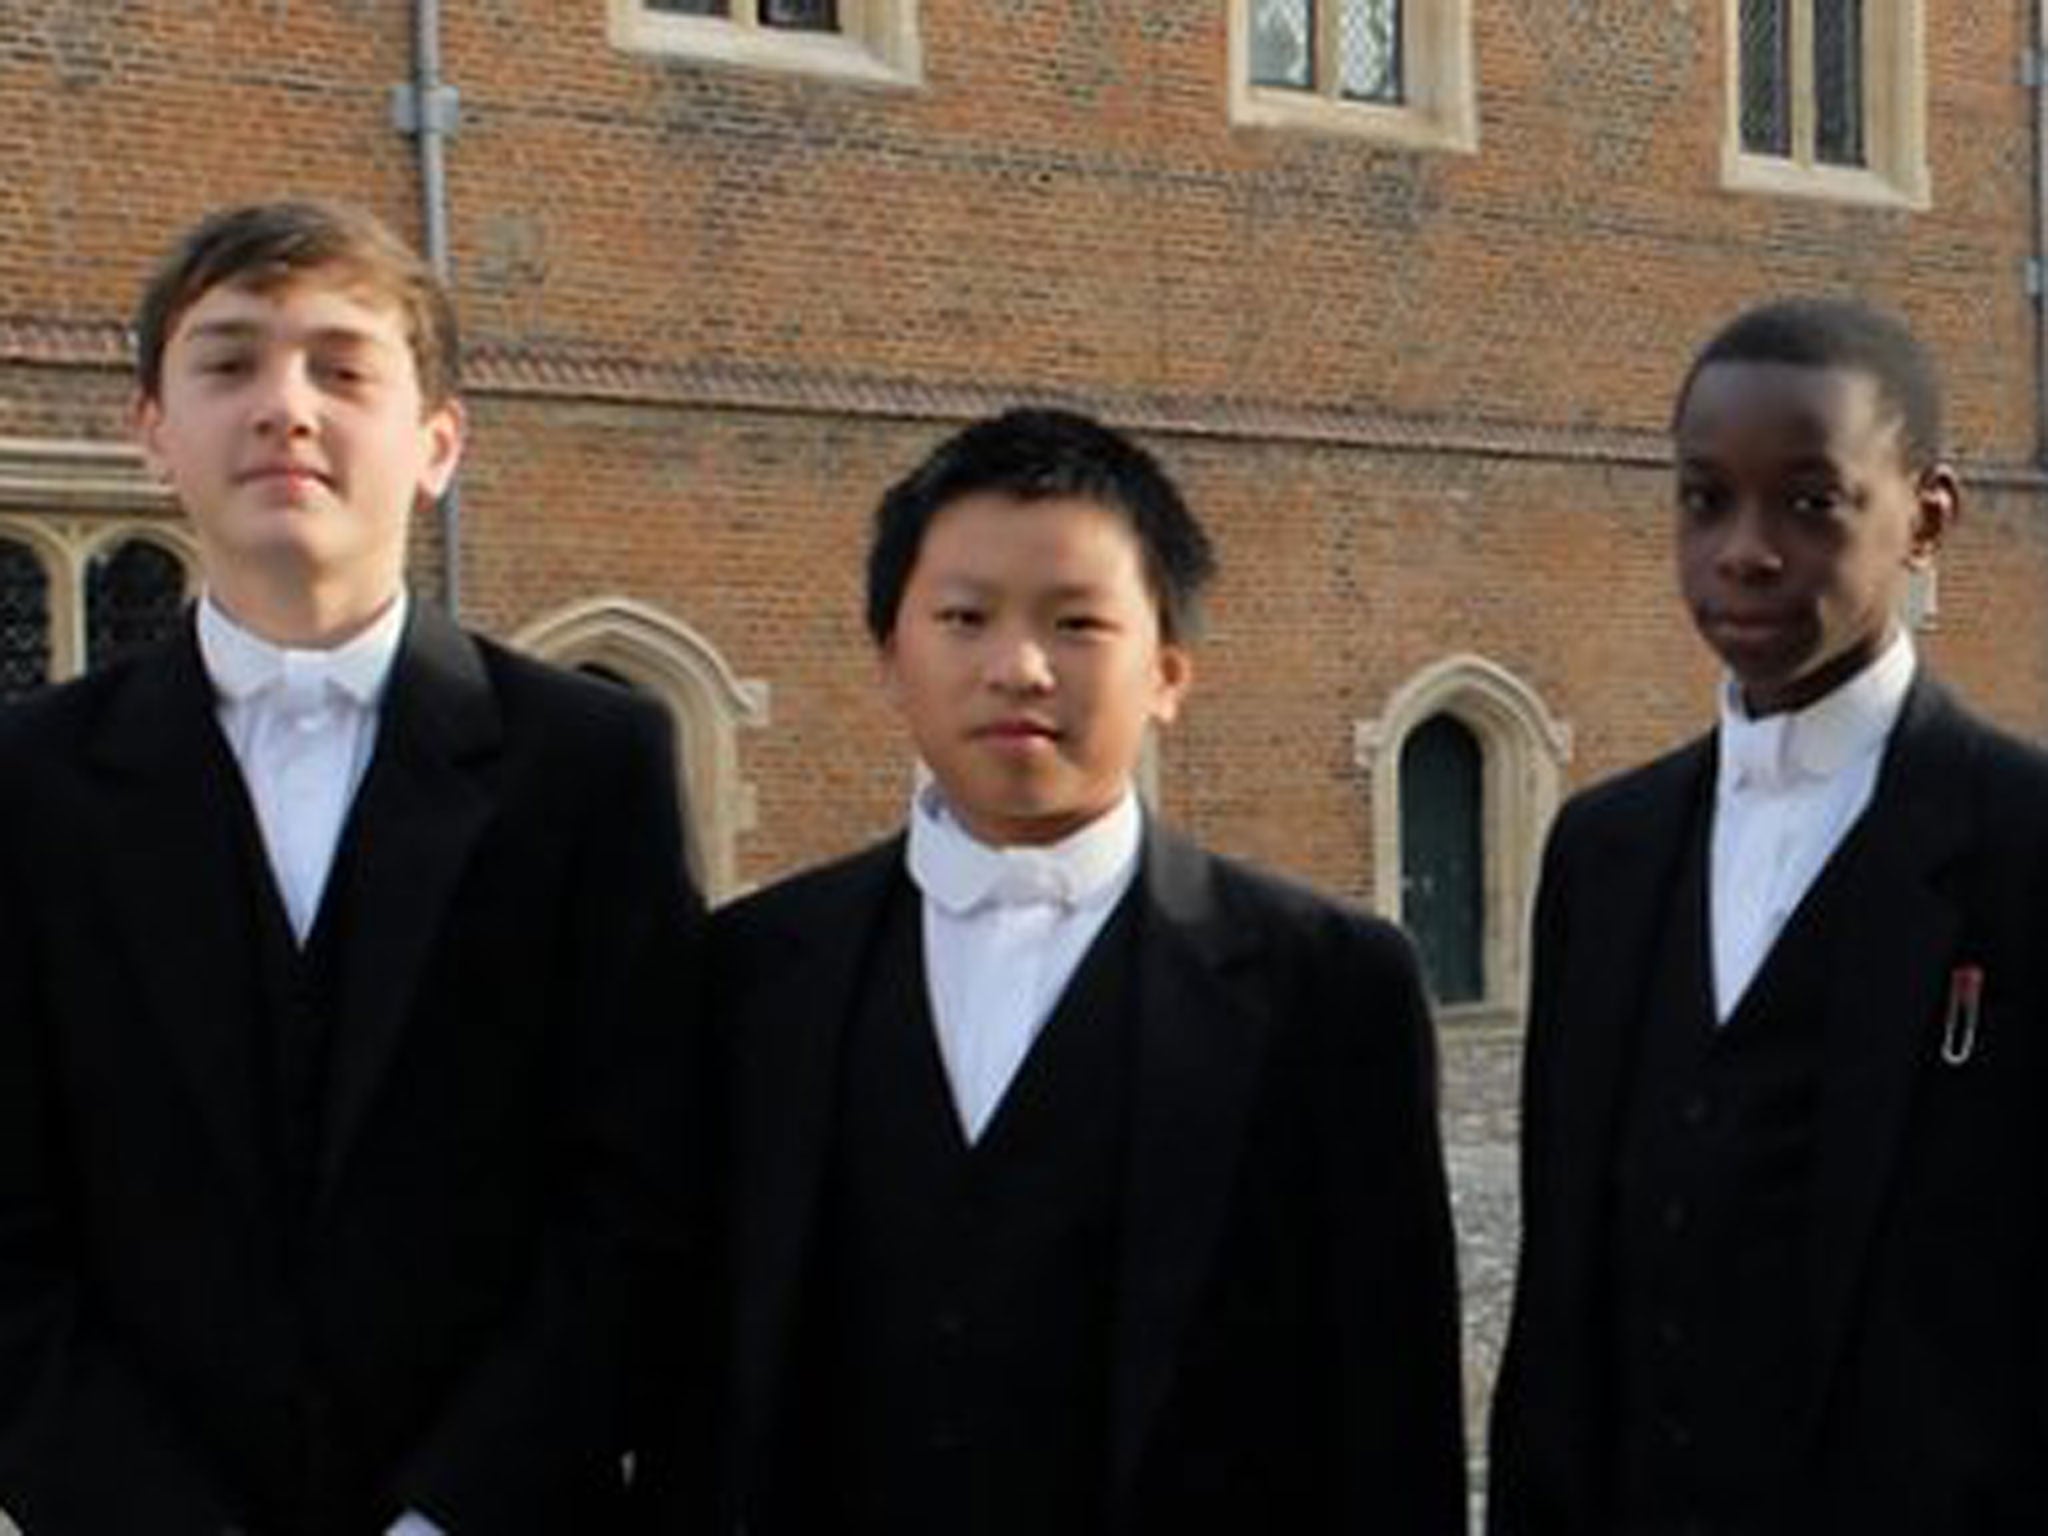 New boys at Eton - My Life: the Most Famous School in the World